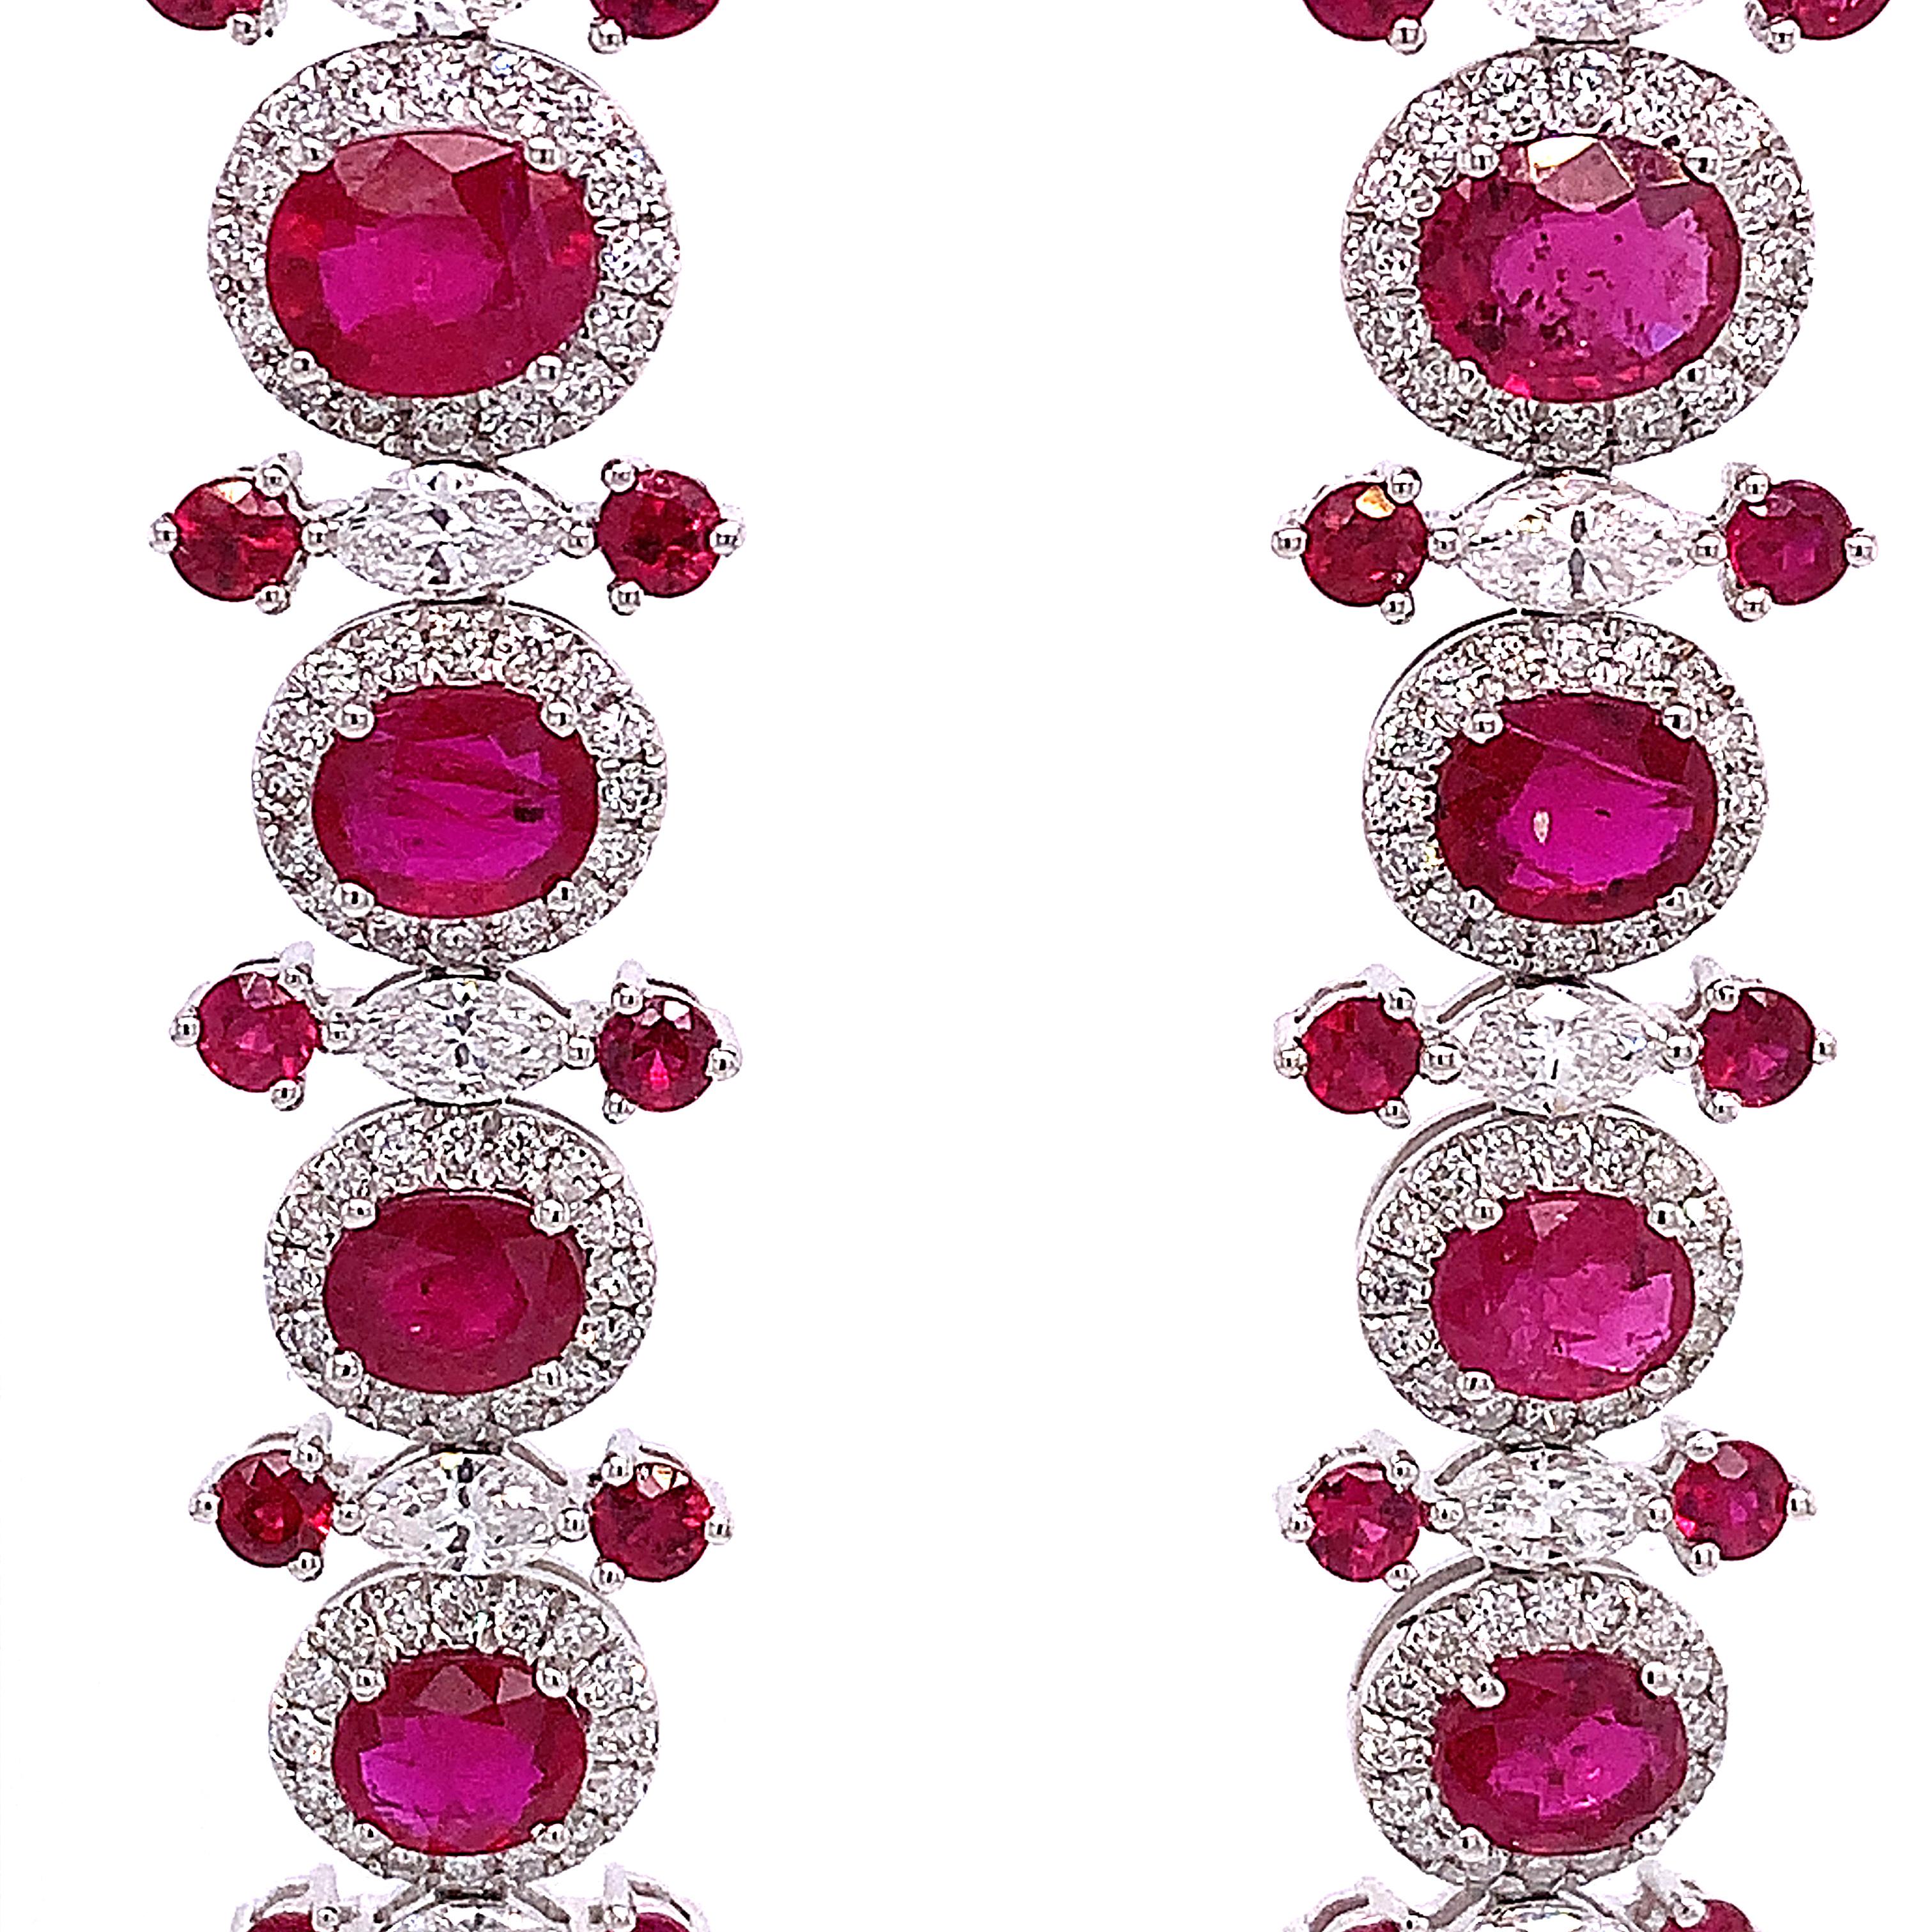 Passion Ruby Collection

Oval shape Rubies with Diamonds halo linear earrings set in 18K White Gold.

Ruby: 7.98ct total weight.
Diamond: 2.33ct total weight.
All diamonds are G-H/SI stones.